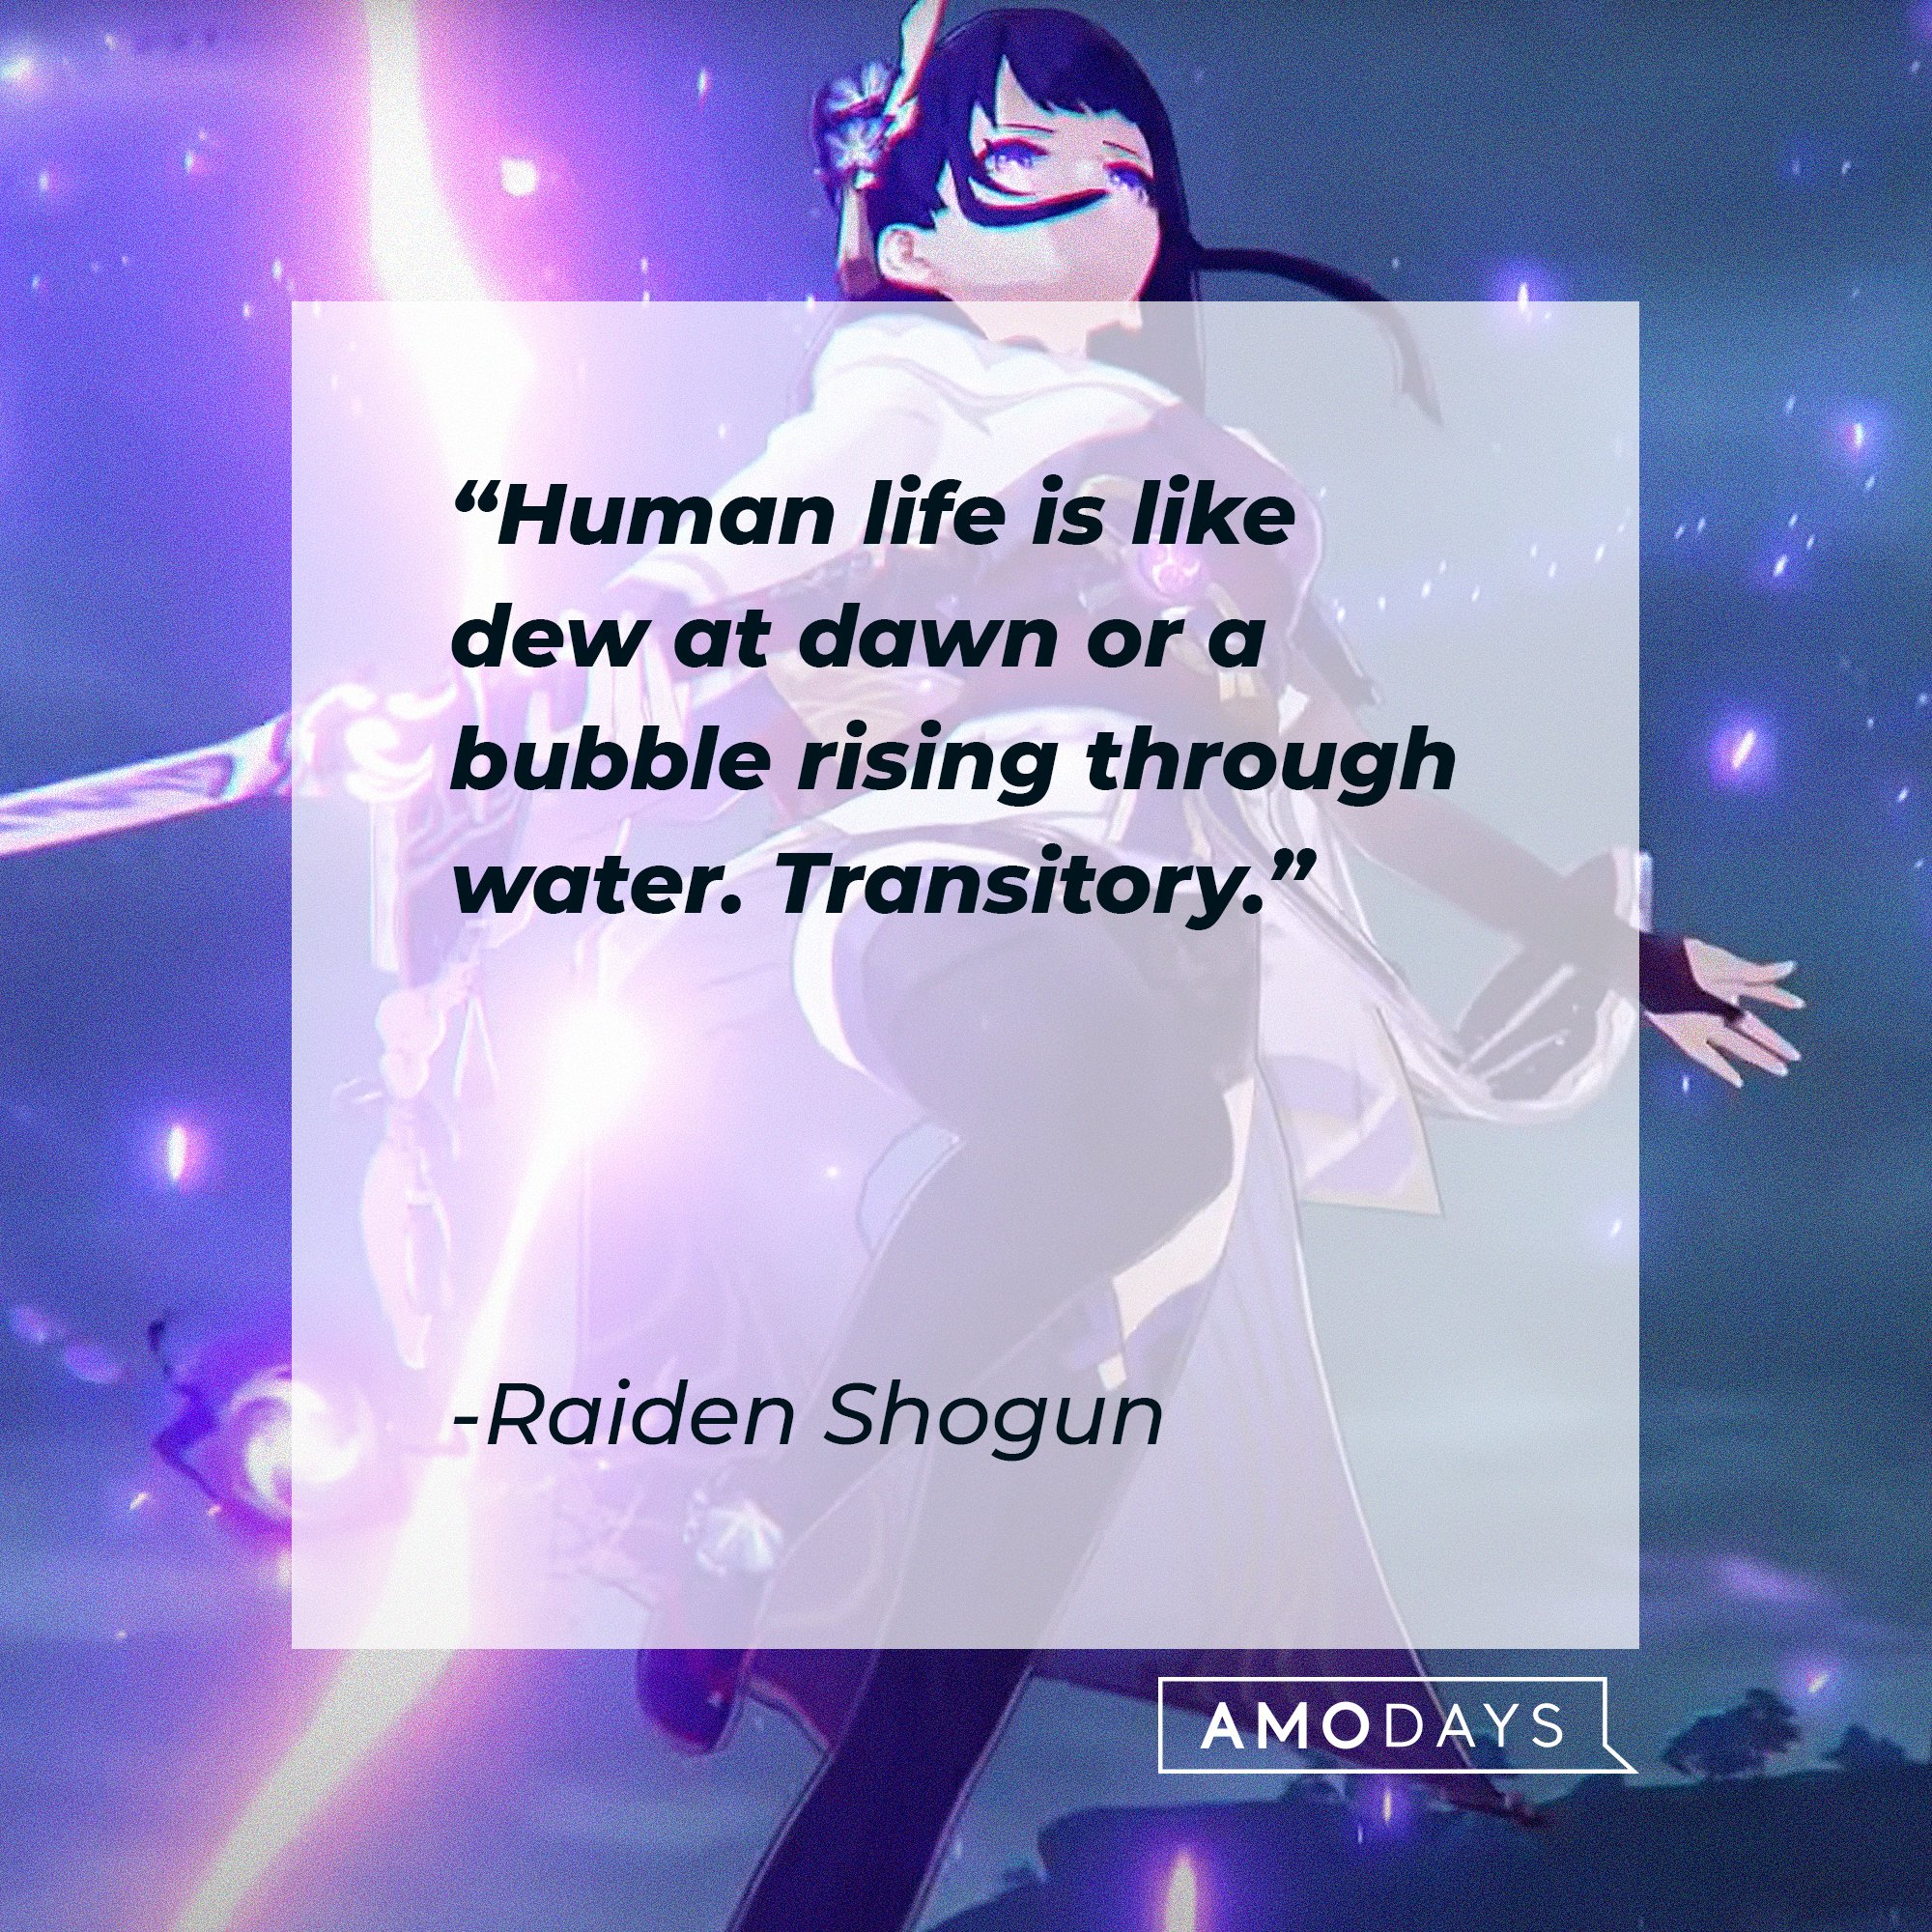  Raiden Shogun's quote: "Human life is like dew at dawn or a bubble rising through water. Transitory." | Image: AmoDays